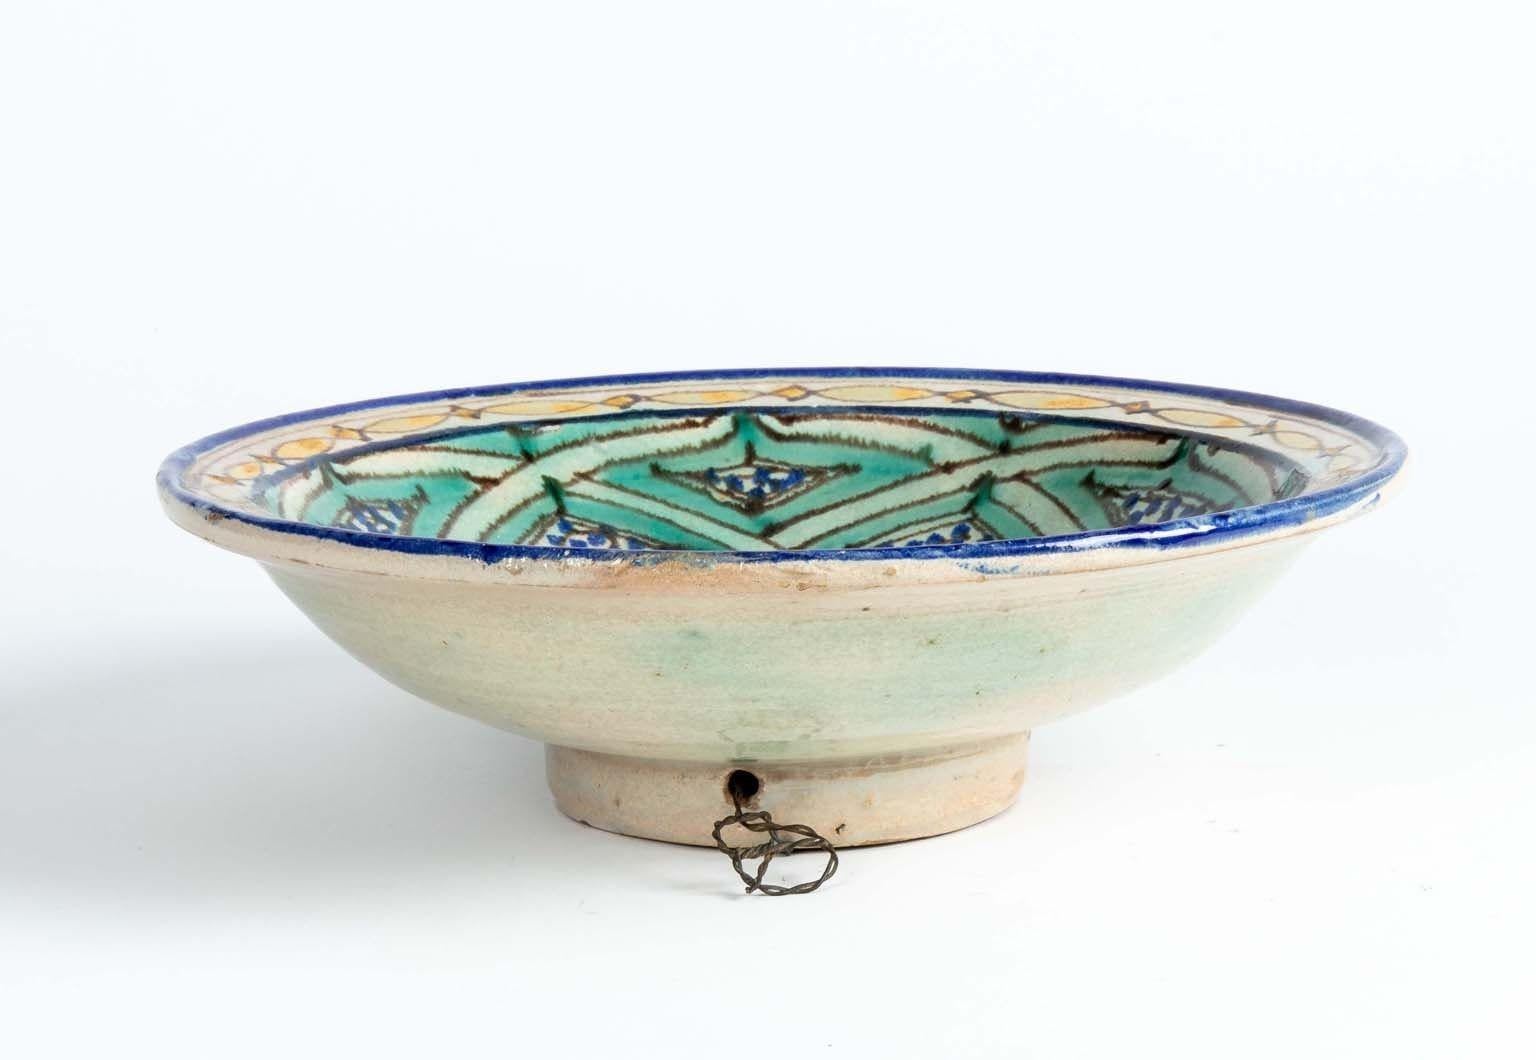 Ceramic Blue, Green, and Yellow Moroccan Bowl, early 20th Century